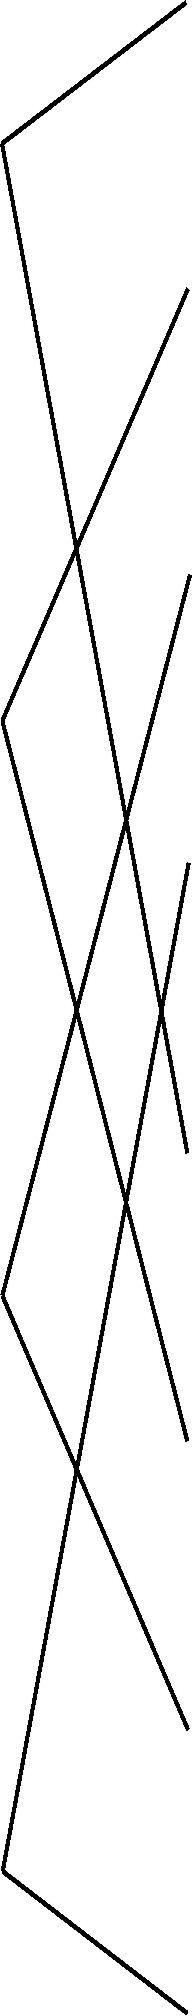 diagonal lines from 4 matches to 2+2 matches